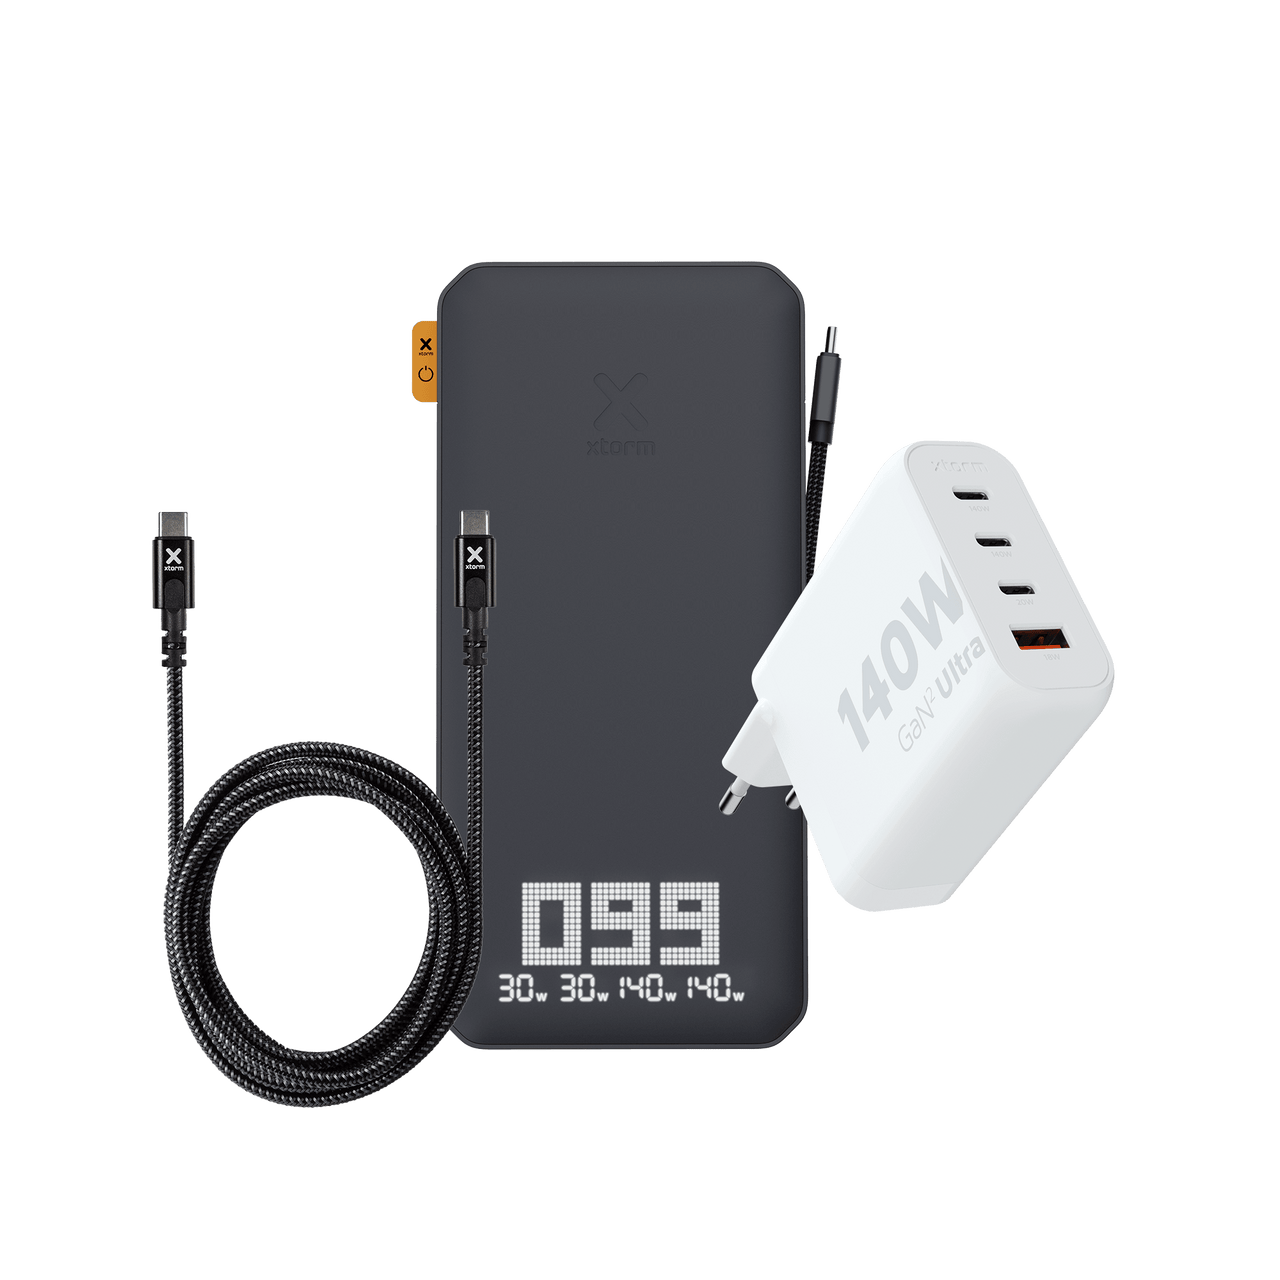 XB403 + USB-C PD 240W Cable + Fast Charge Adapter 140W - Xtorm EU